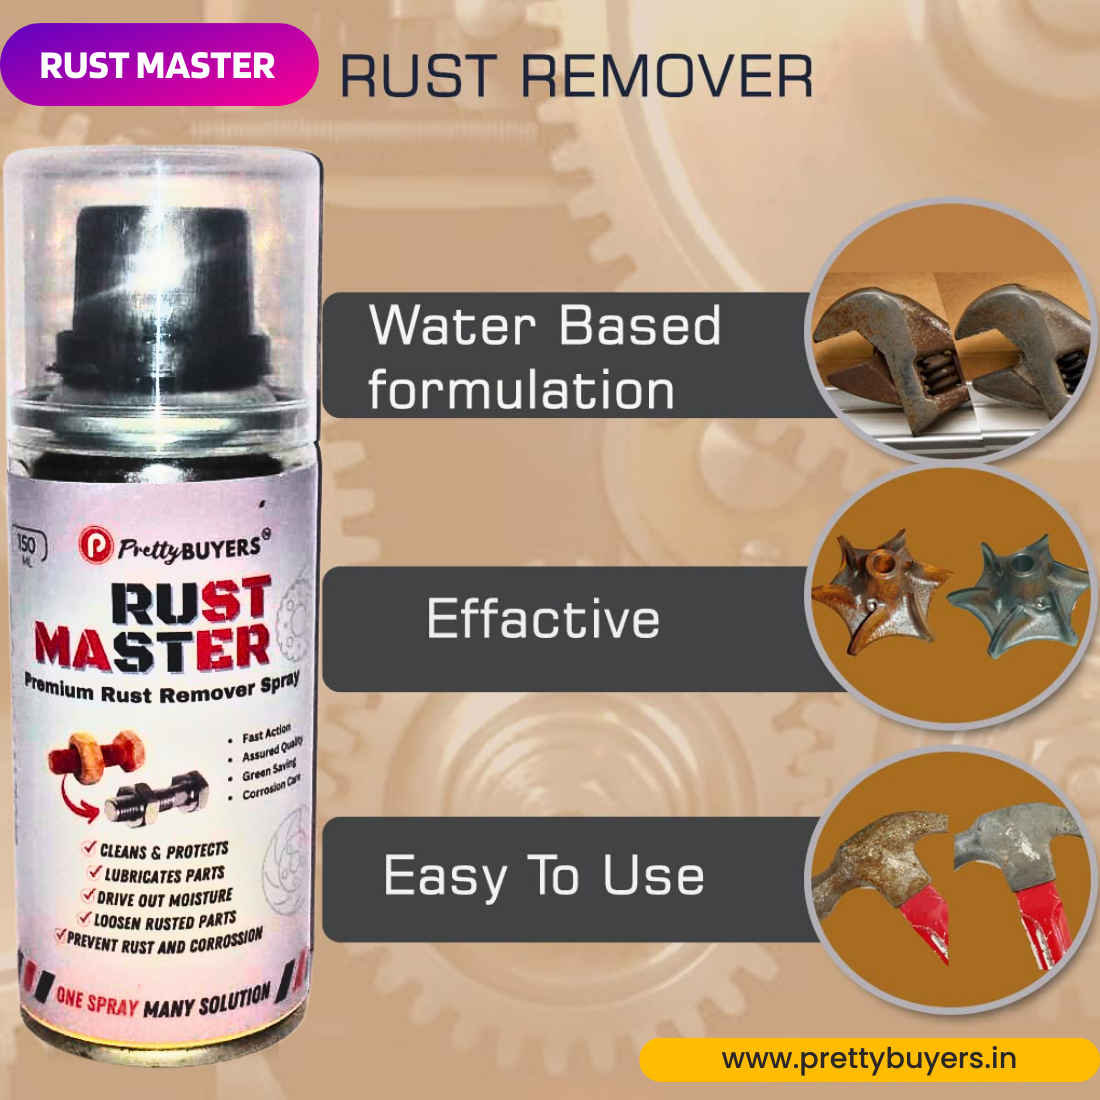 PrettyBUYERS RUST Master - Instant Rust Remover Spray (150 mlx1) | Removes Rust | Protects from Corrosion